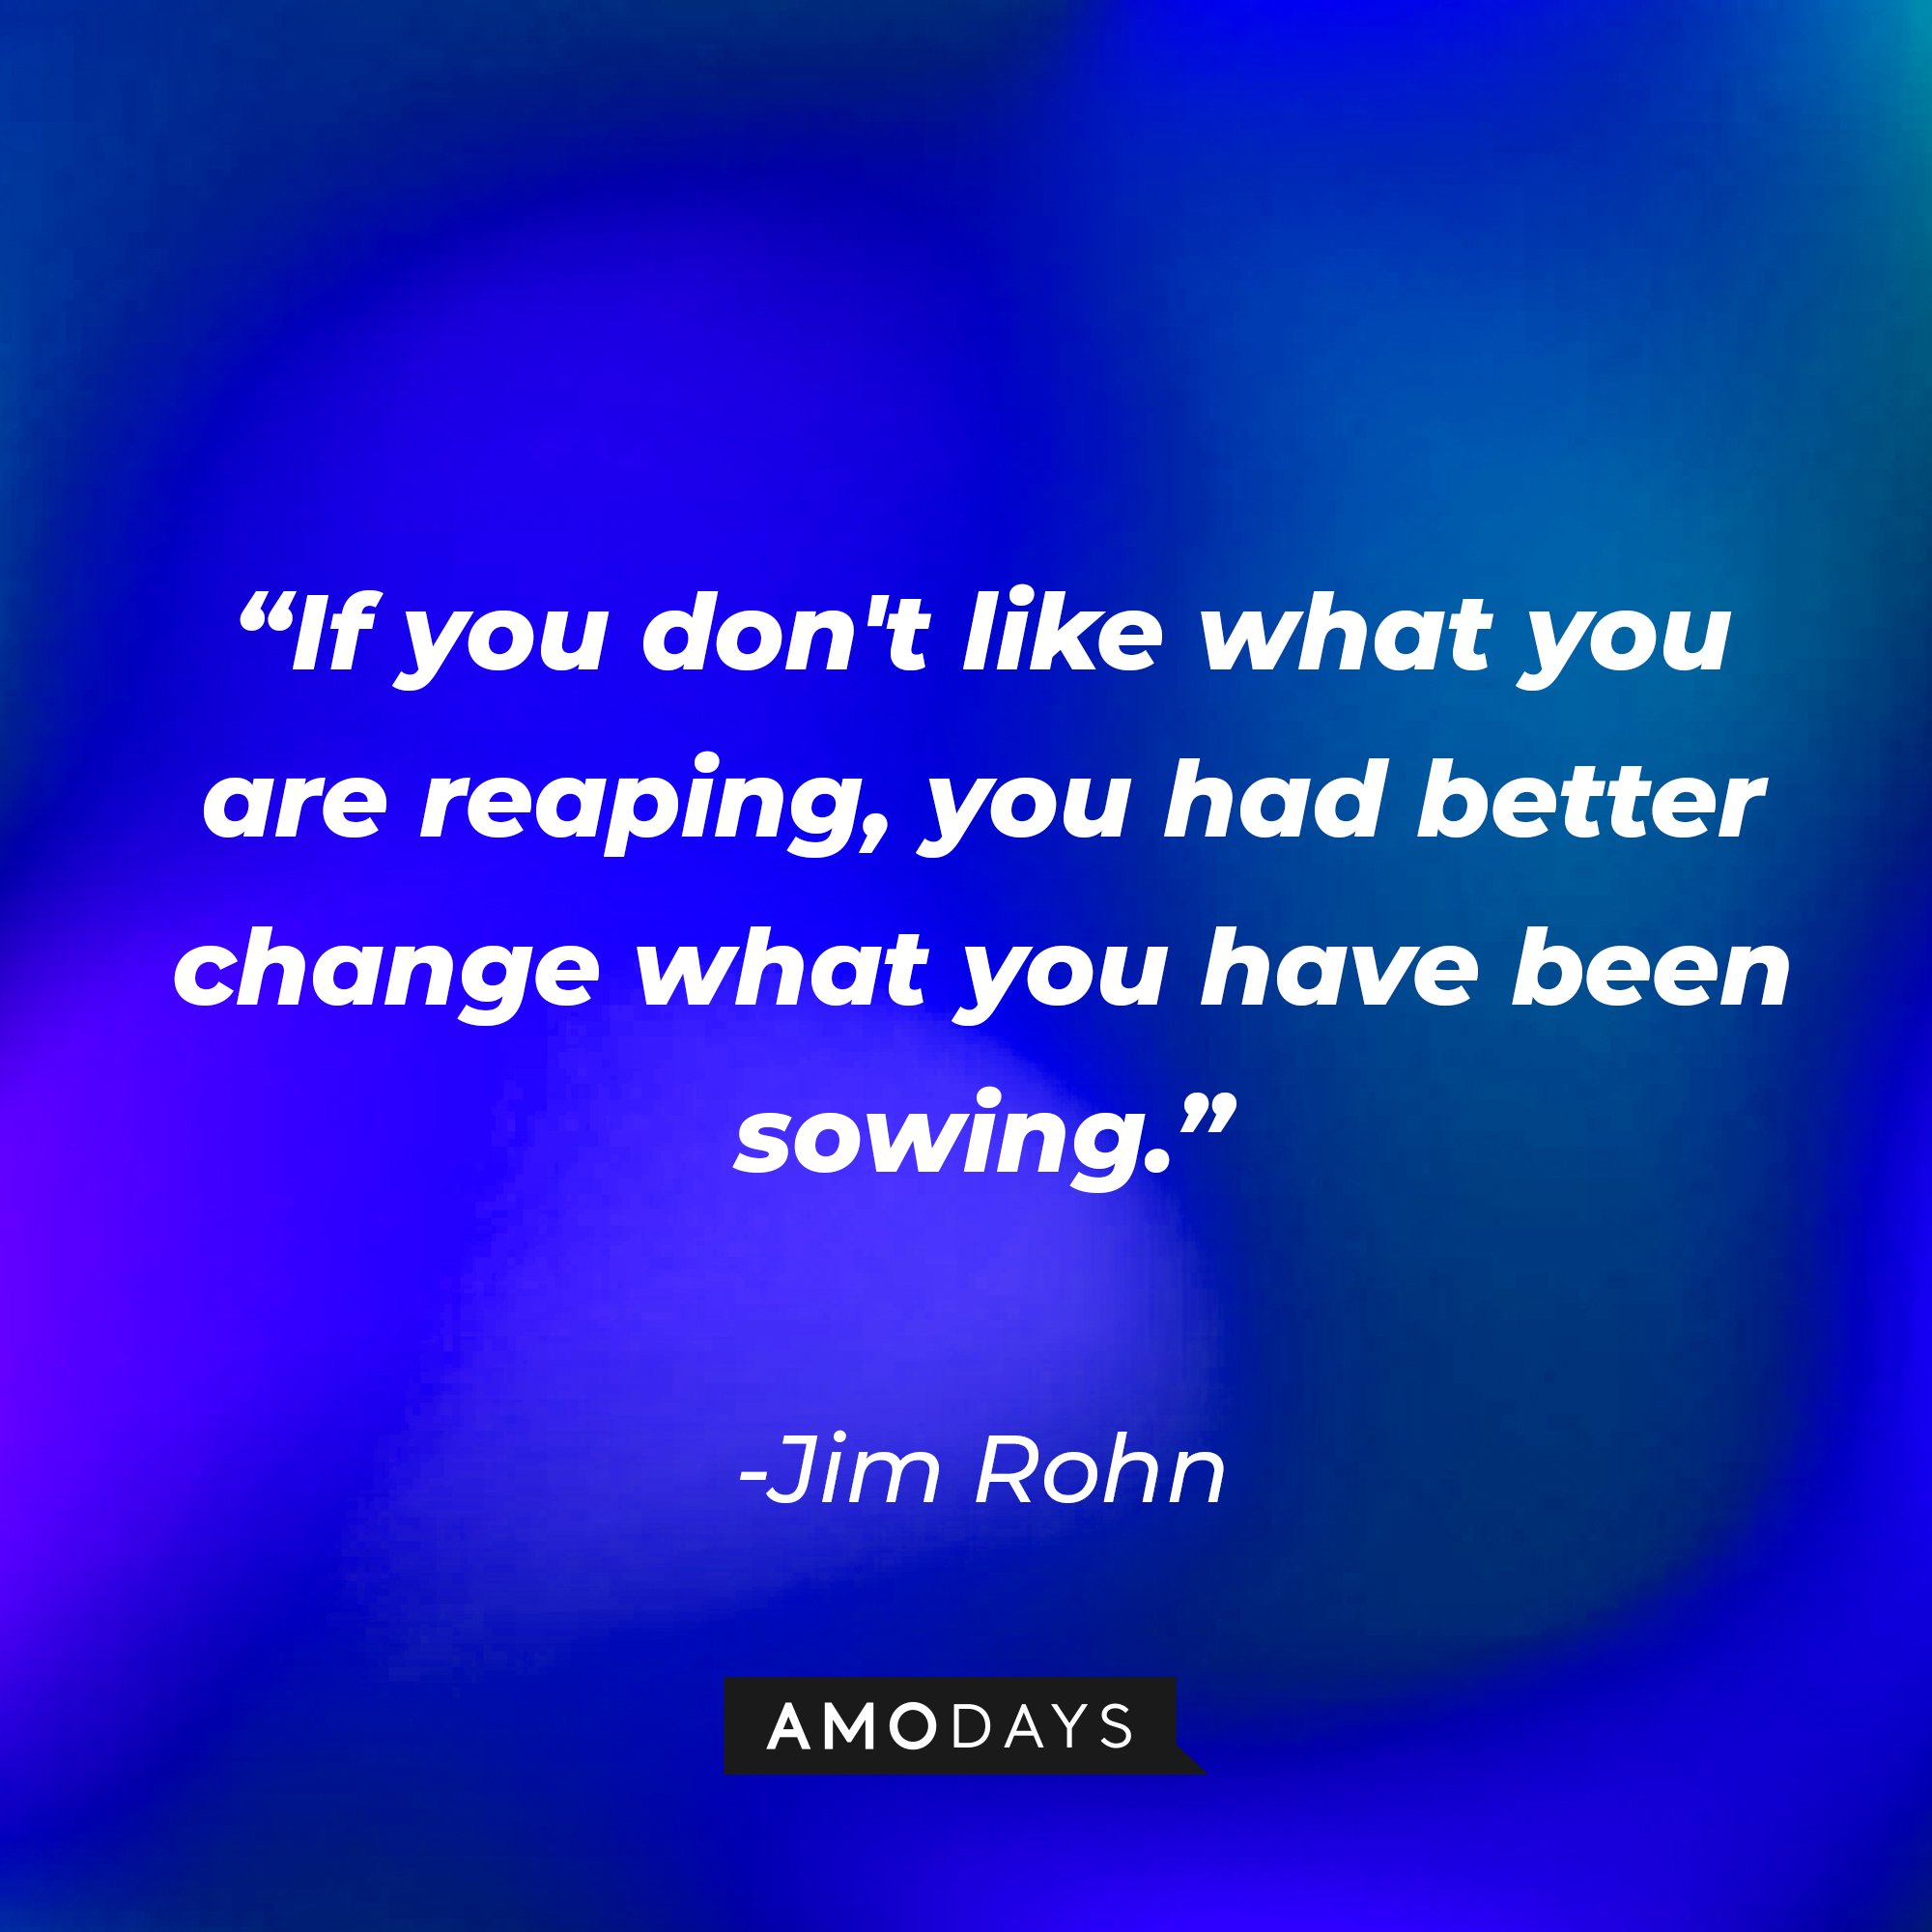 Jim Rohn’s quote: “If you don't like what you are reaping, you had better change what you have been sowing." | Image: AmoDays